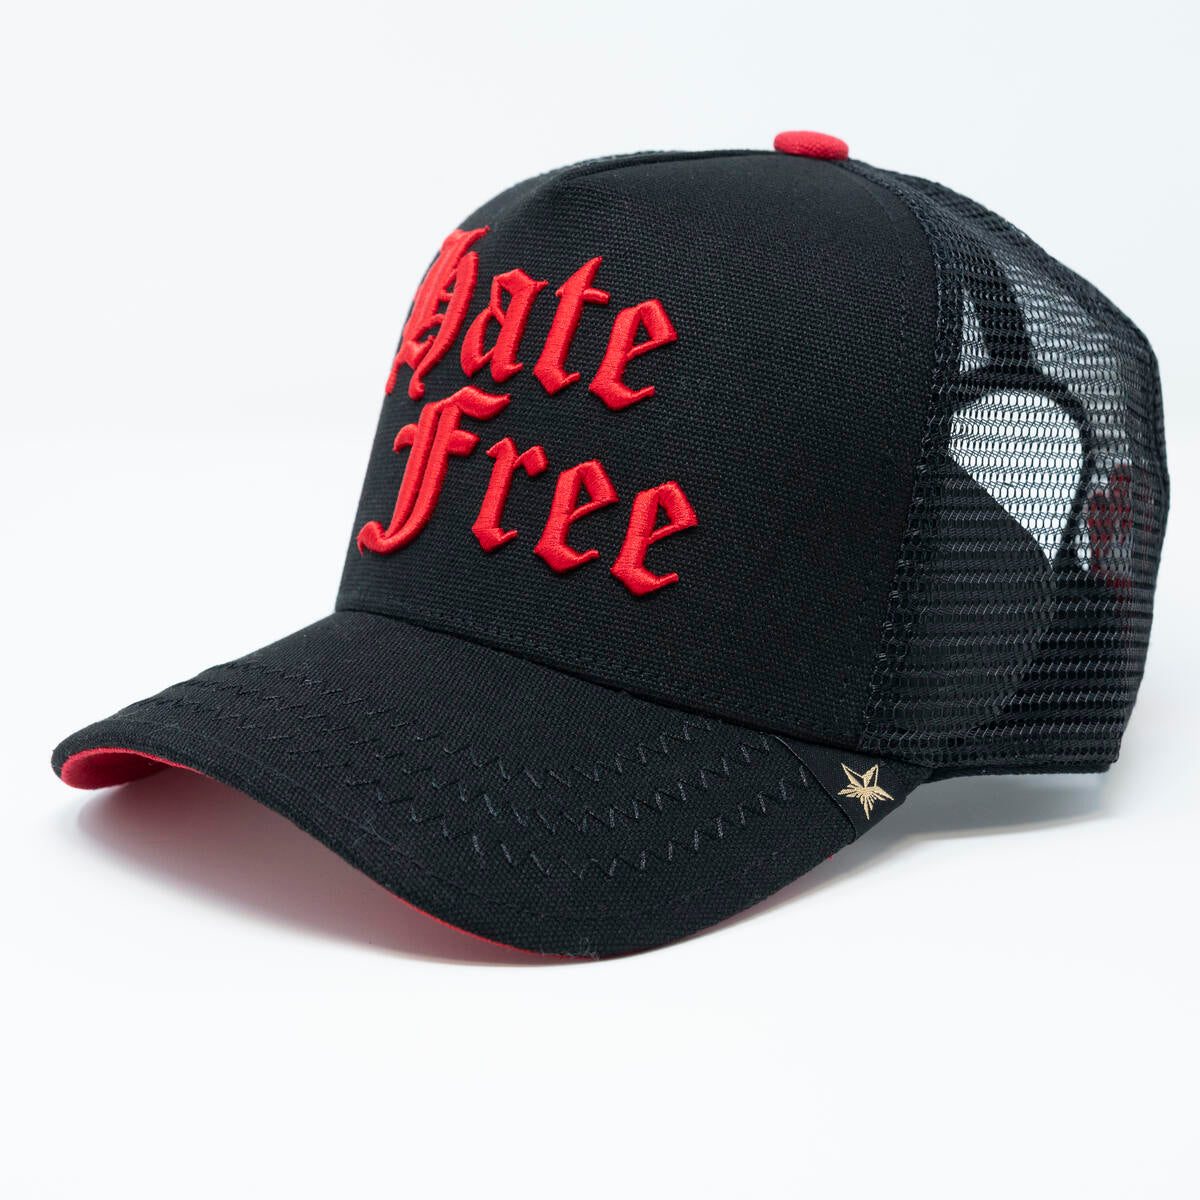 GOLD STAR - Hate Free